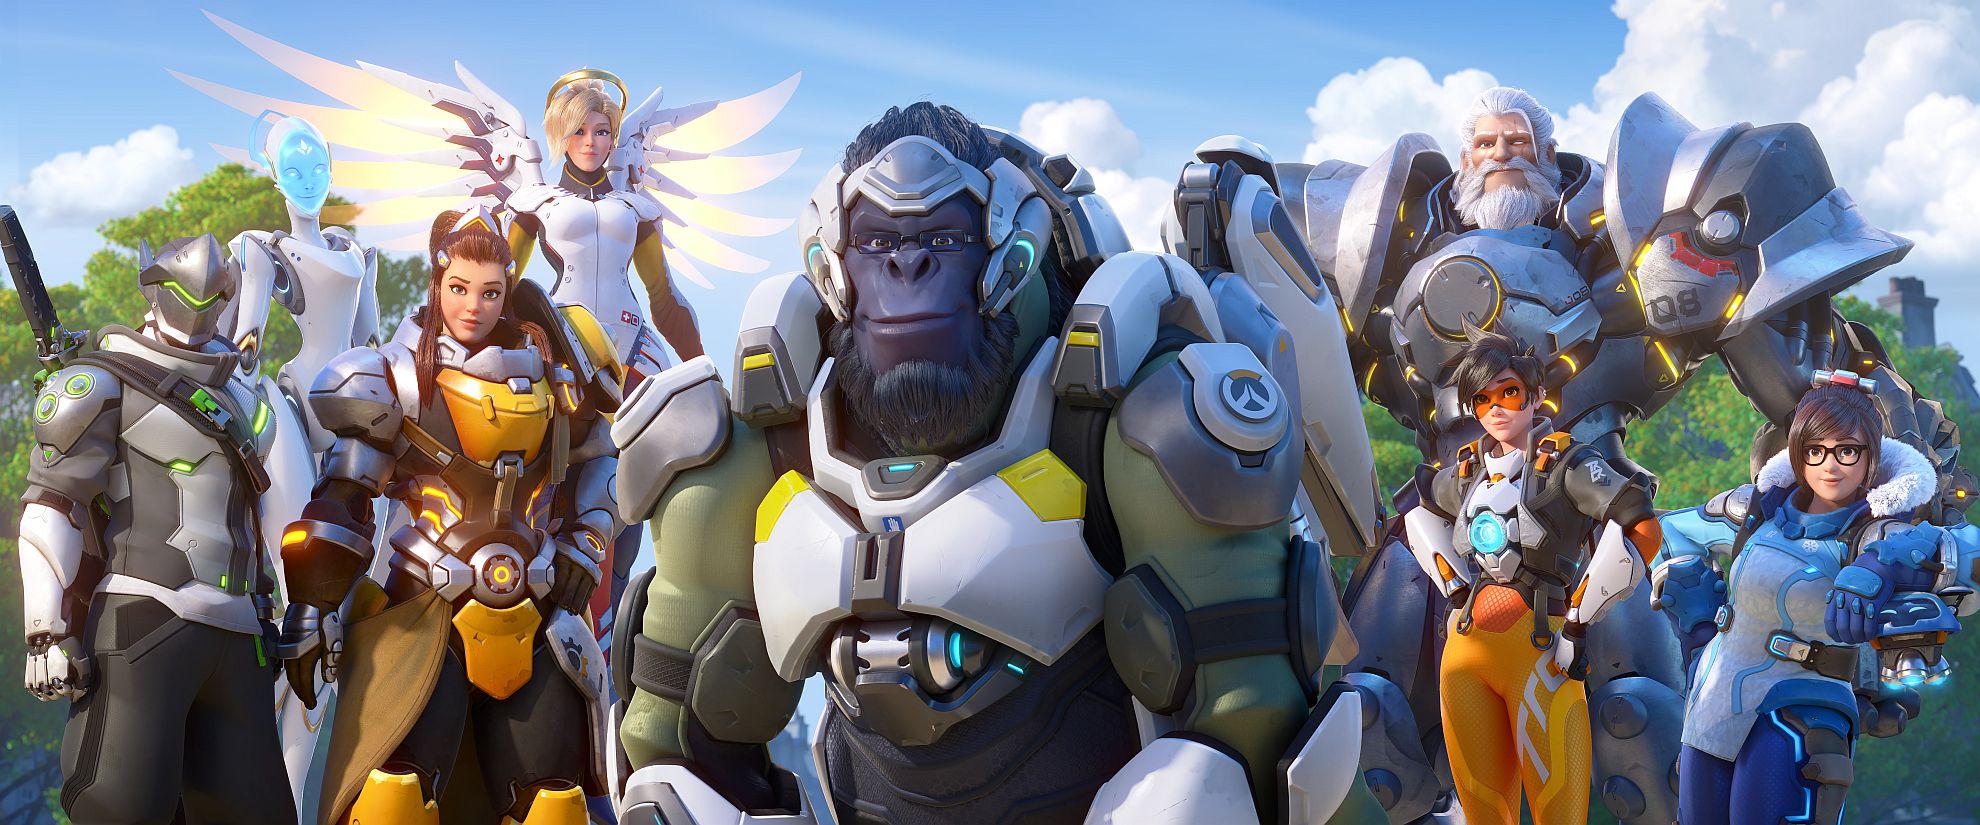 Image for Overwatch 2 makes huge changes to PvP - 5v5 instead of 6v6, and one tank per team